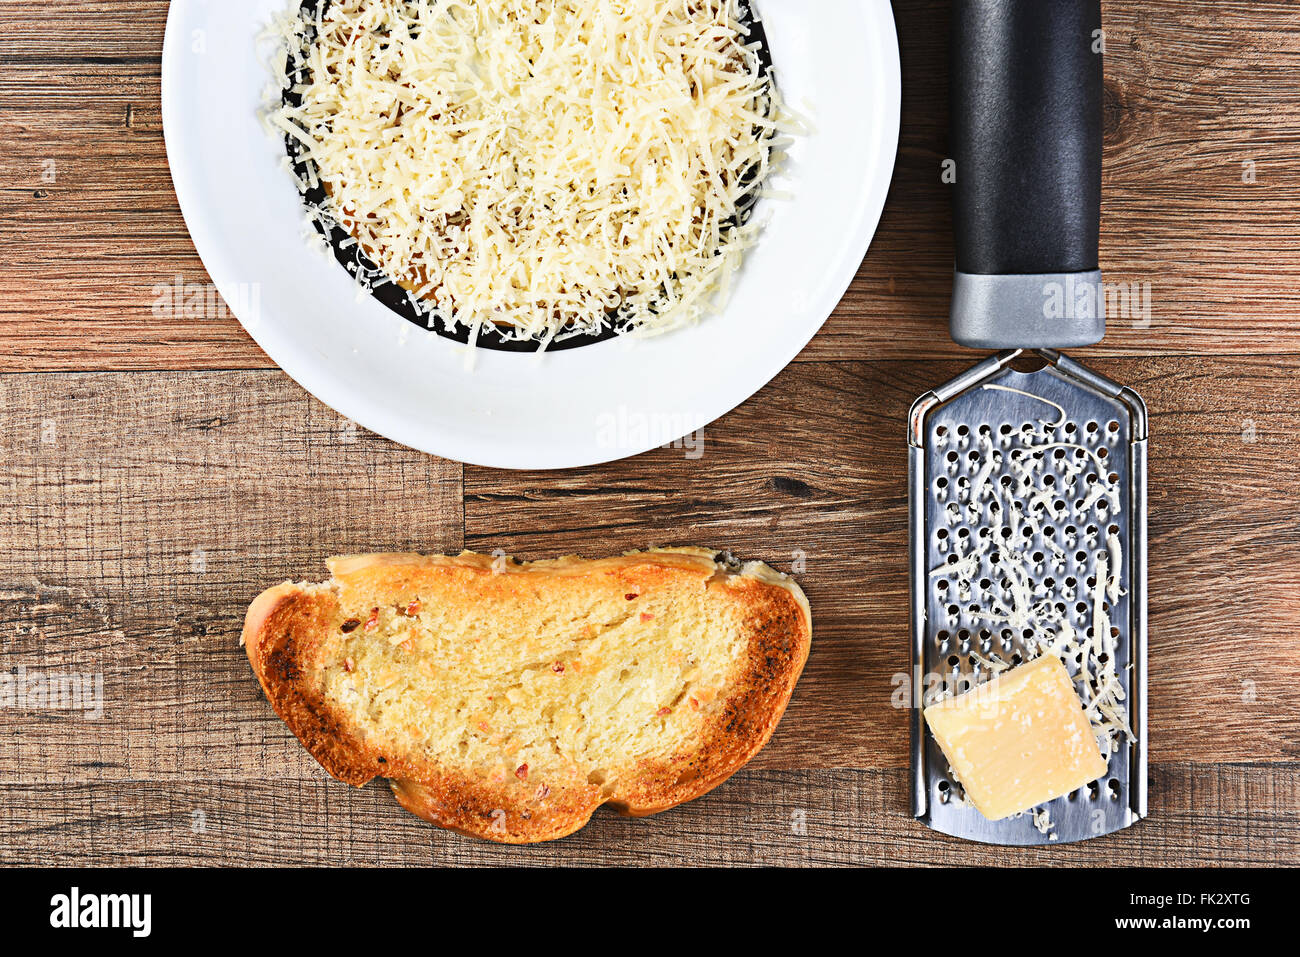 High angle view of a piece of garlic bread and a bowl of grated parmesan cheese with a grater and lump of cheese. Stock Photo